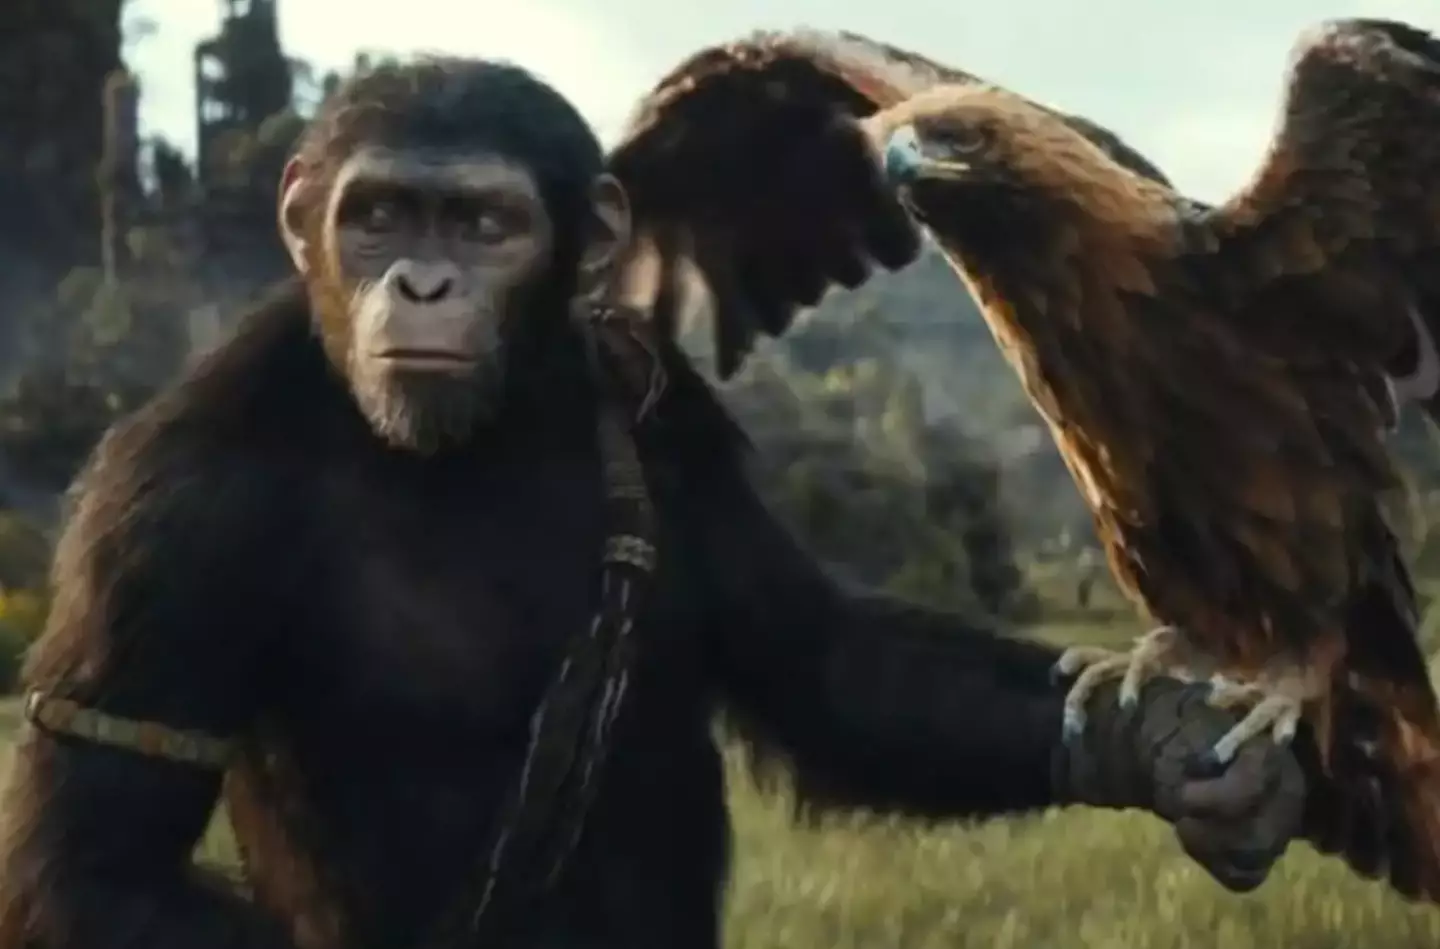 The first trailer for Kingdom of the Planet of the Apes was released yesterday.